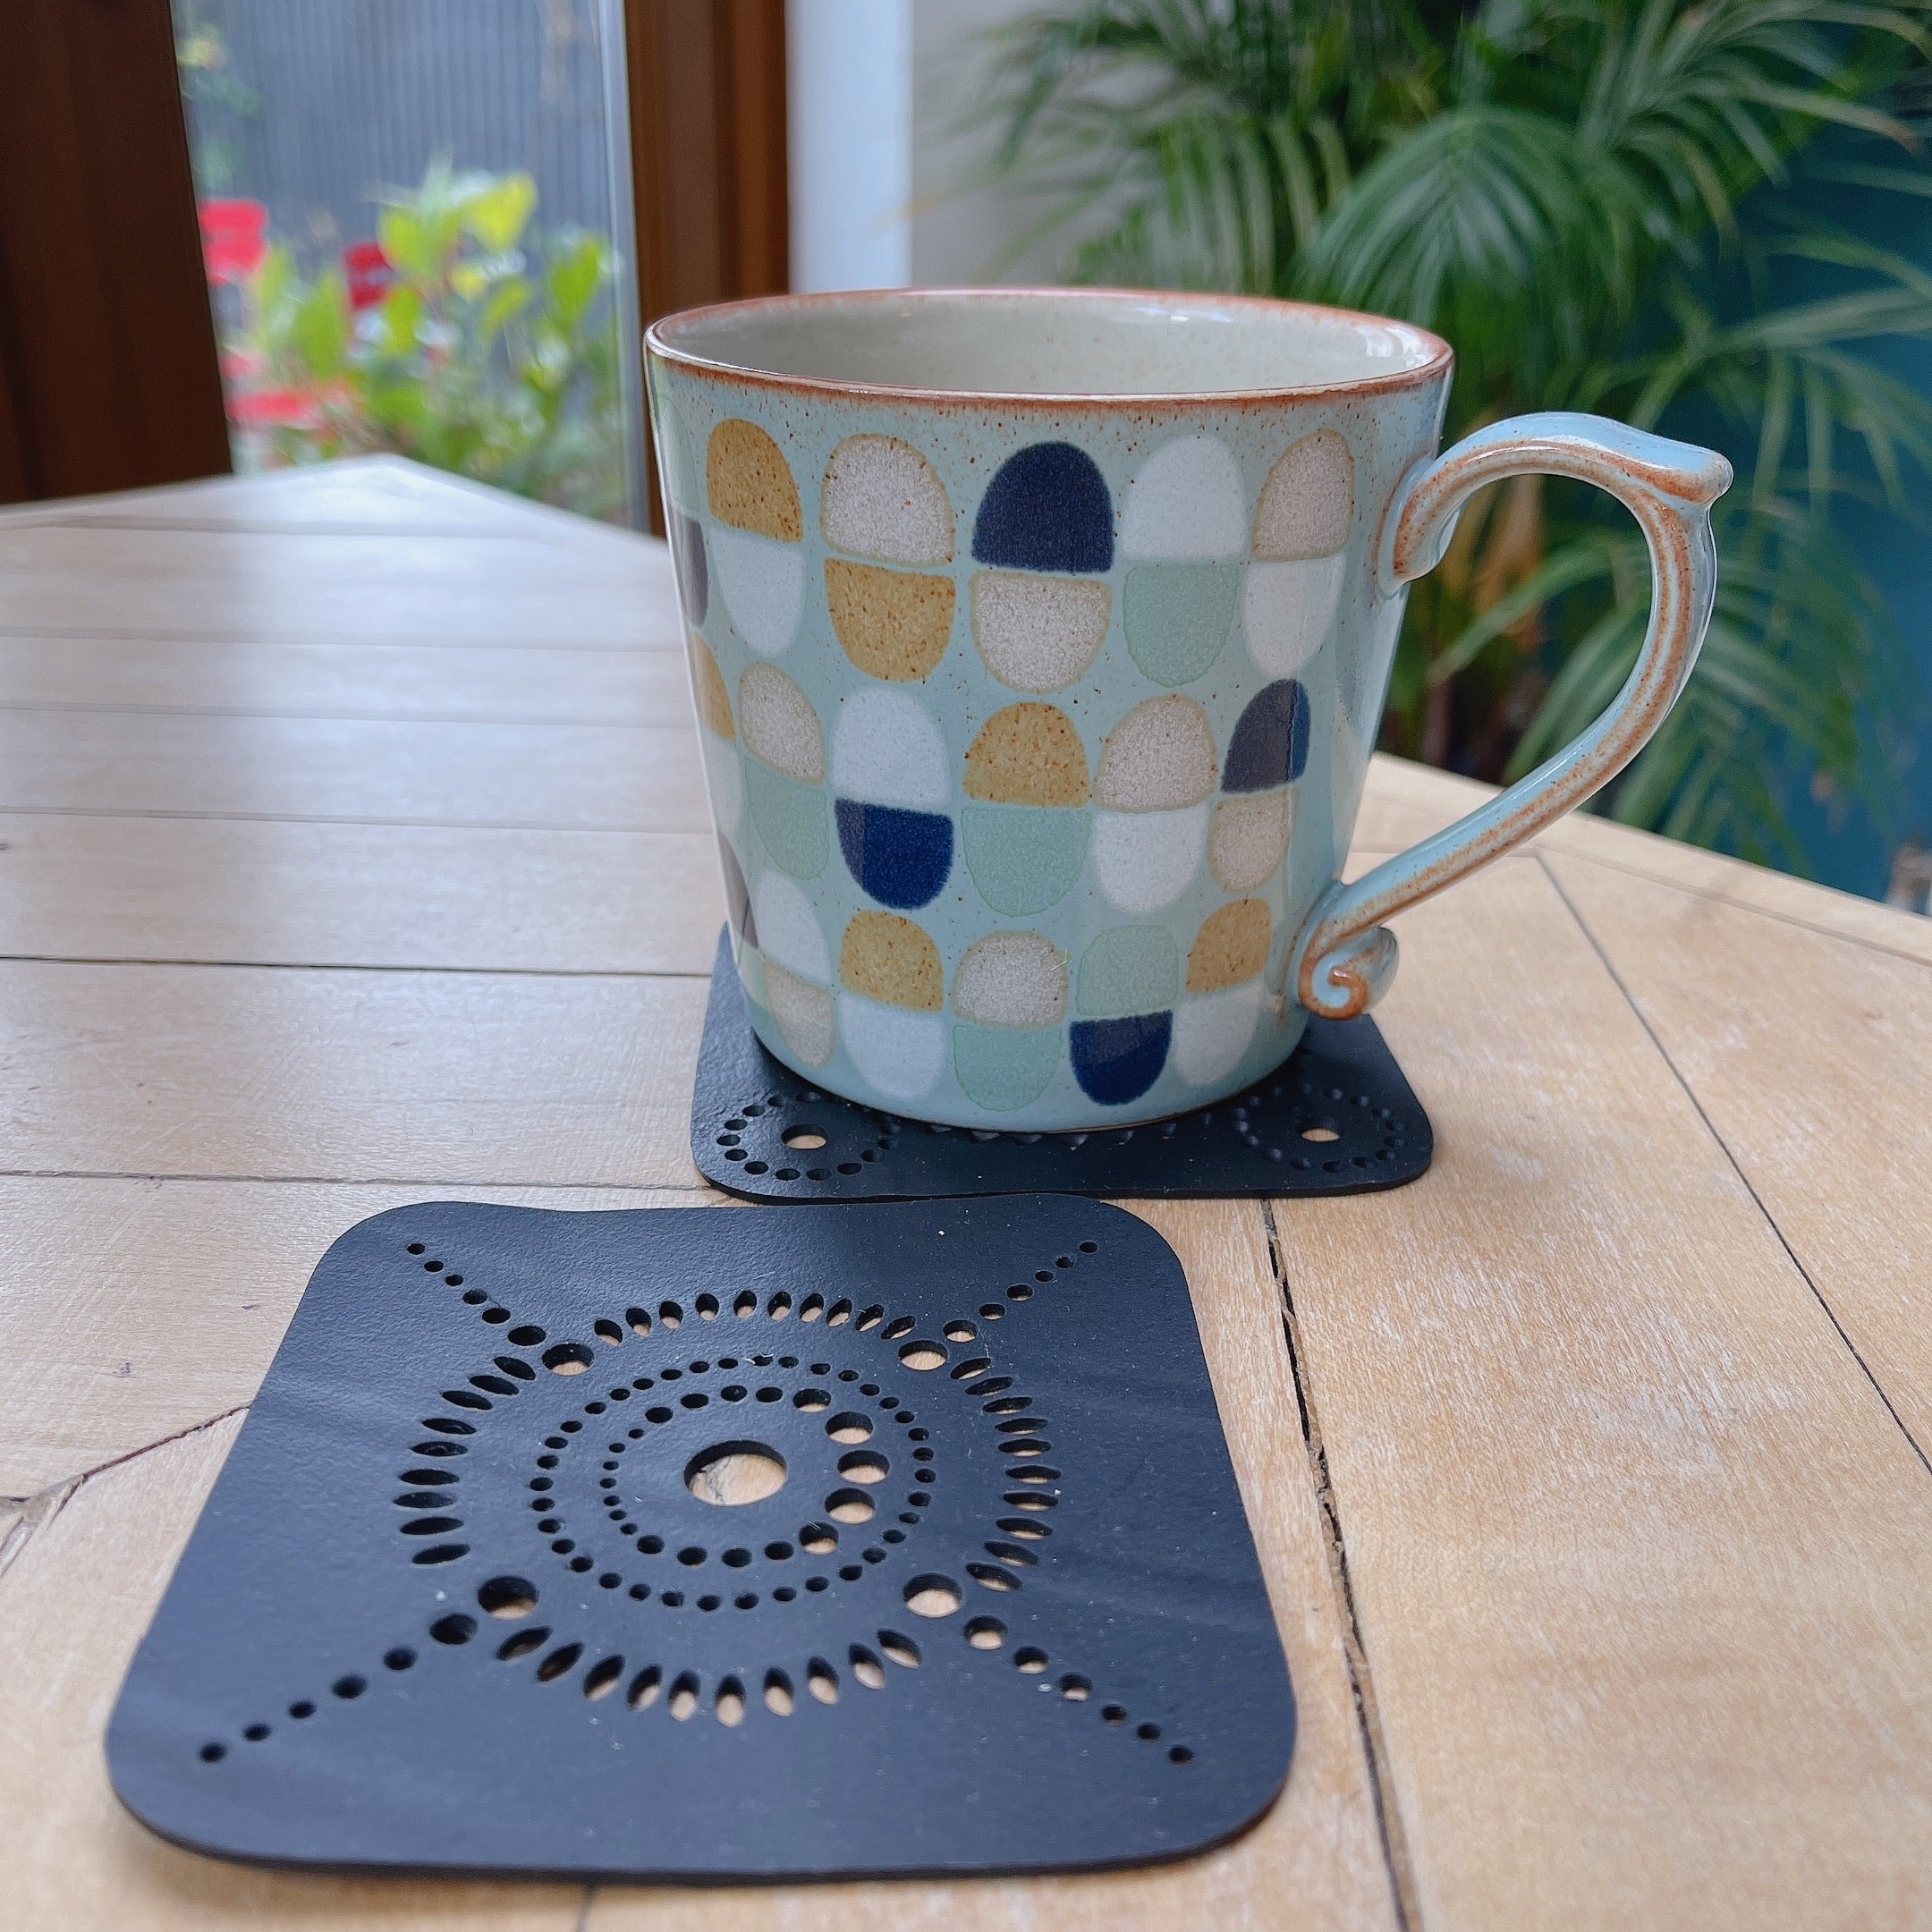 Square Handcrafted Recycled Rubber Coaster - A set of 2 or 4